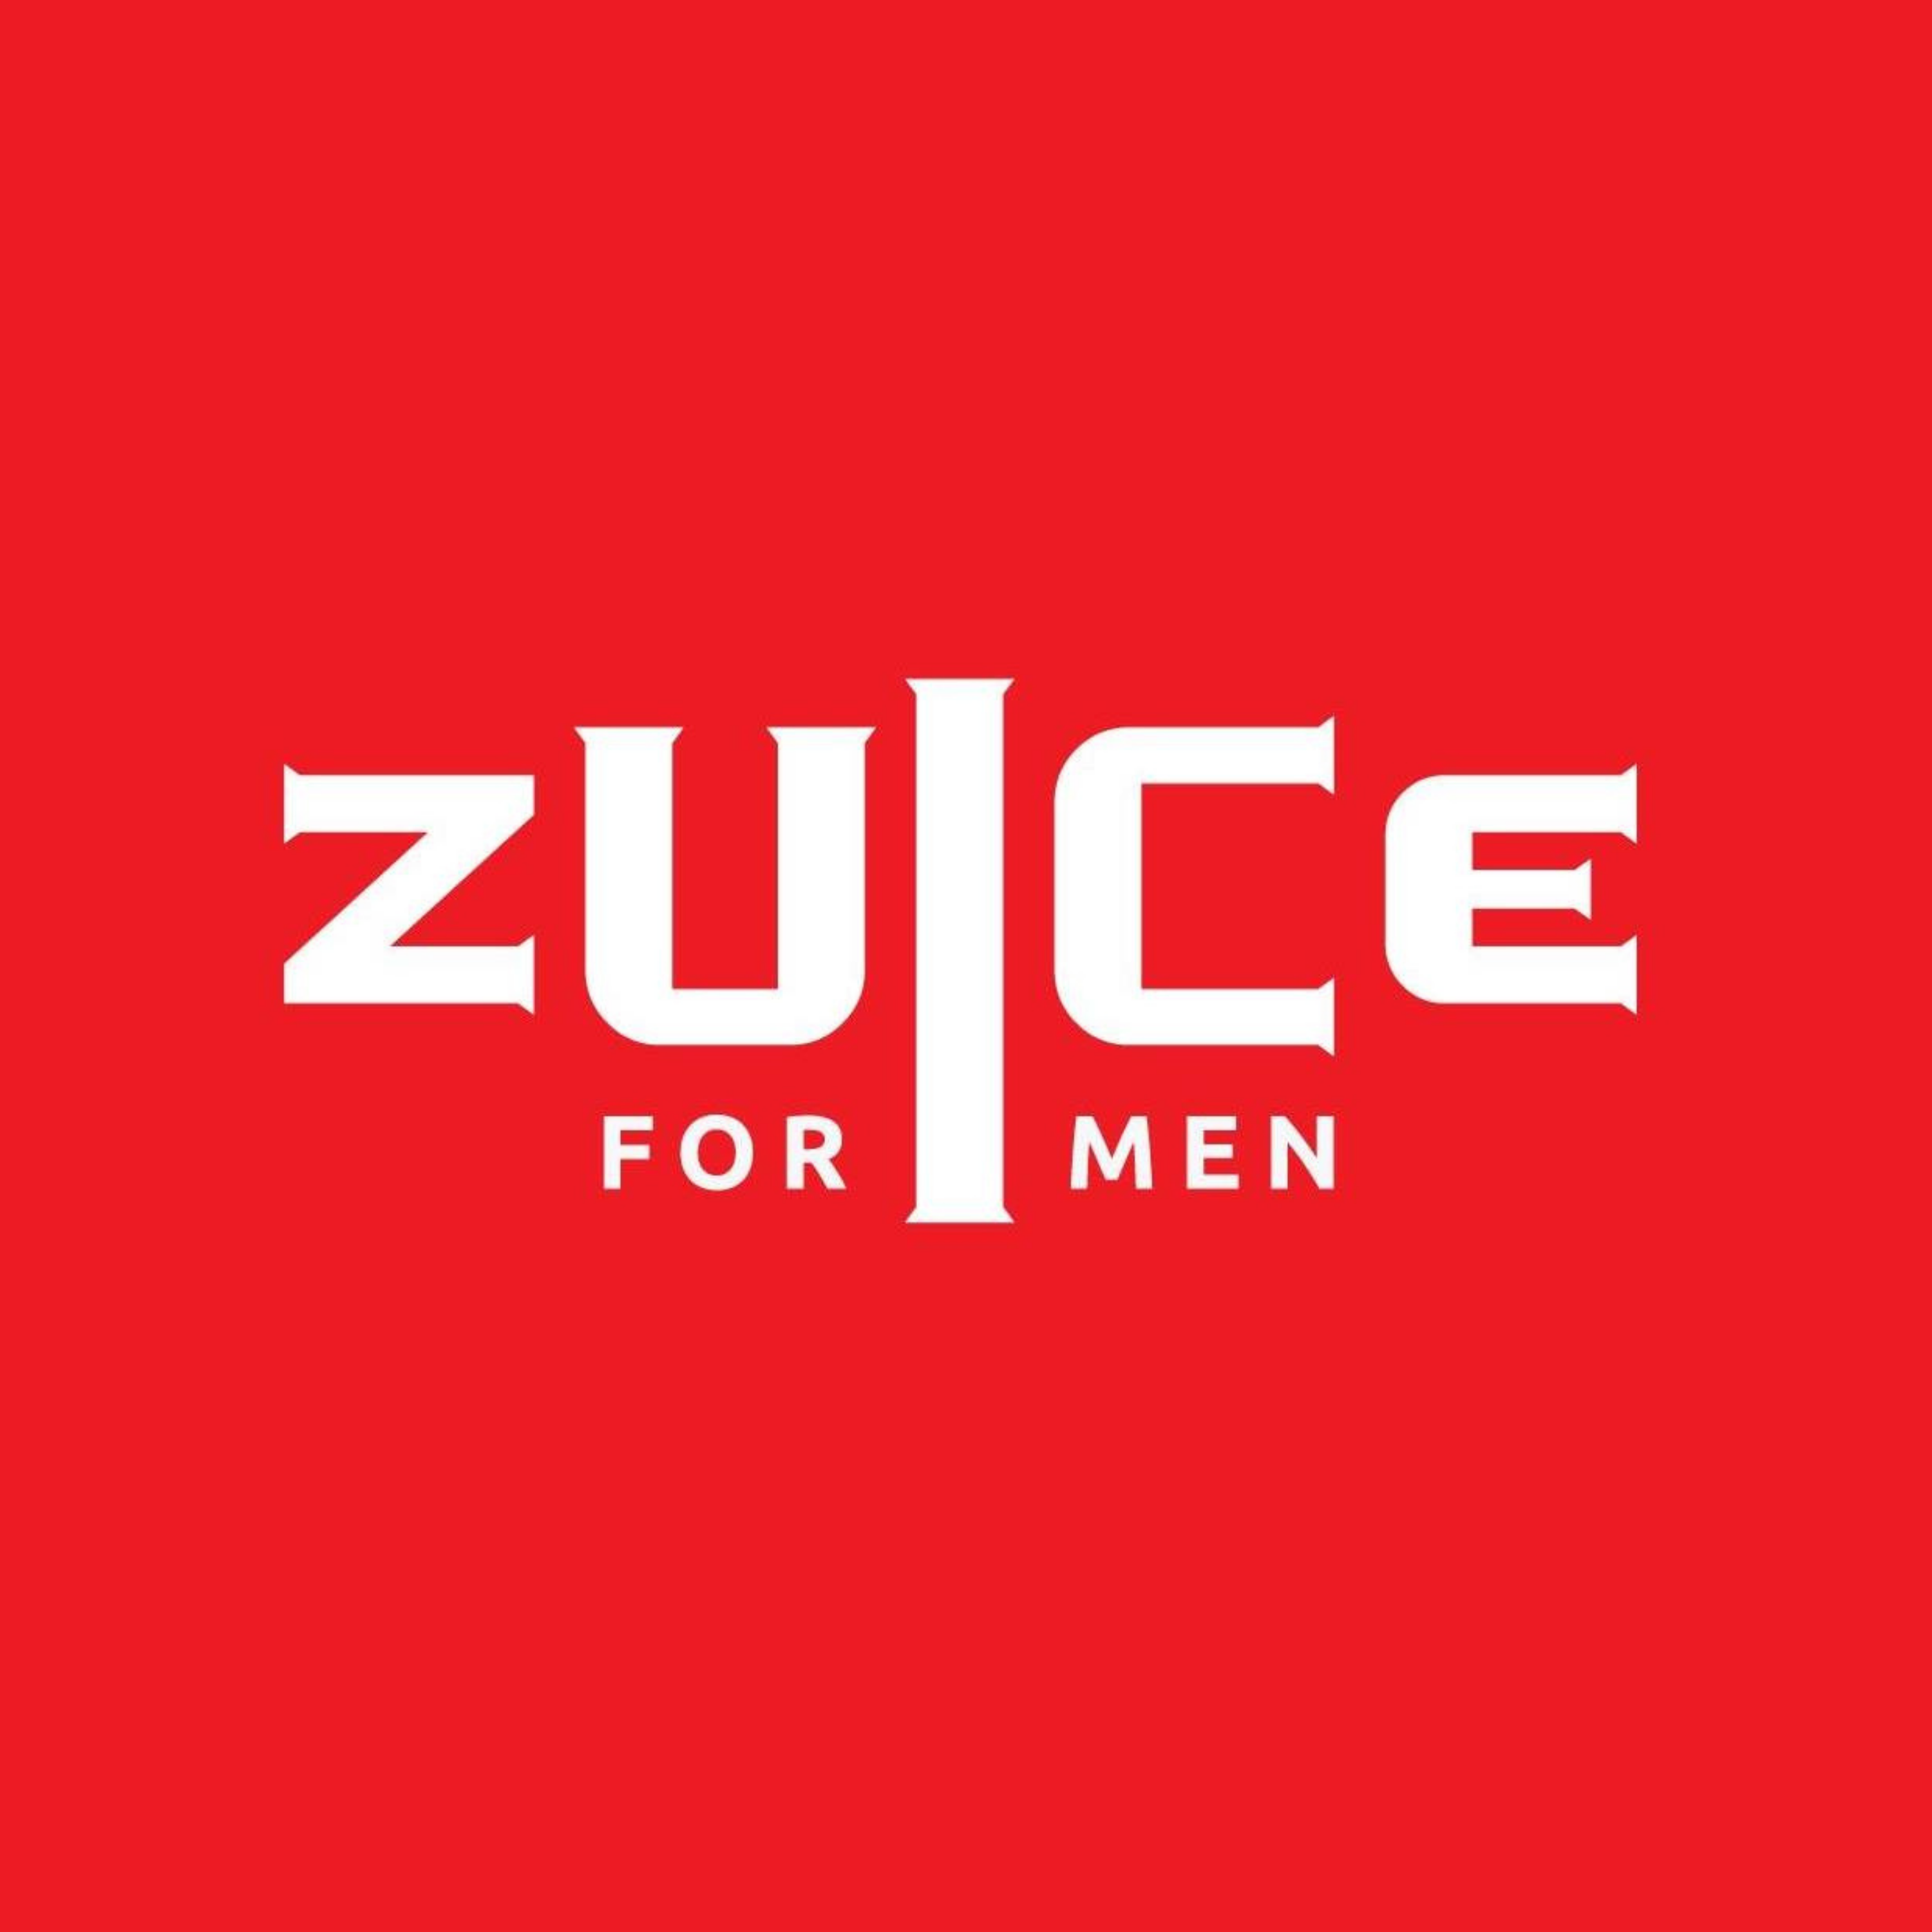 Zuice